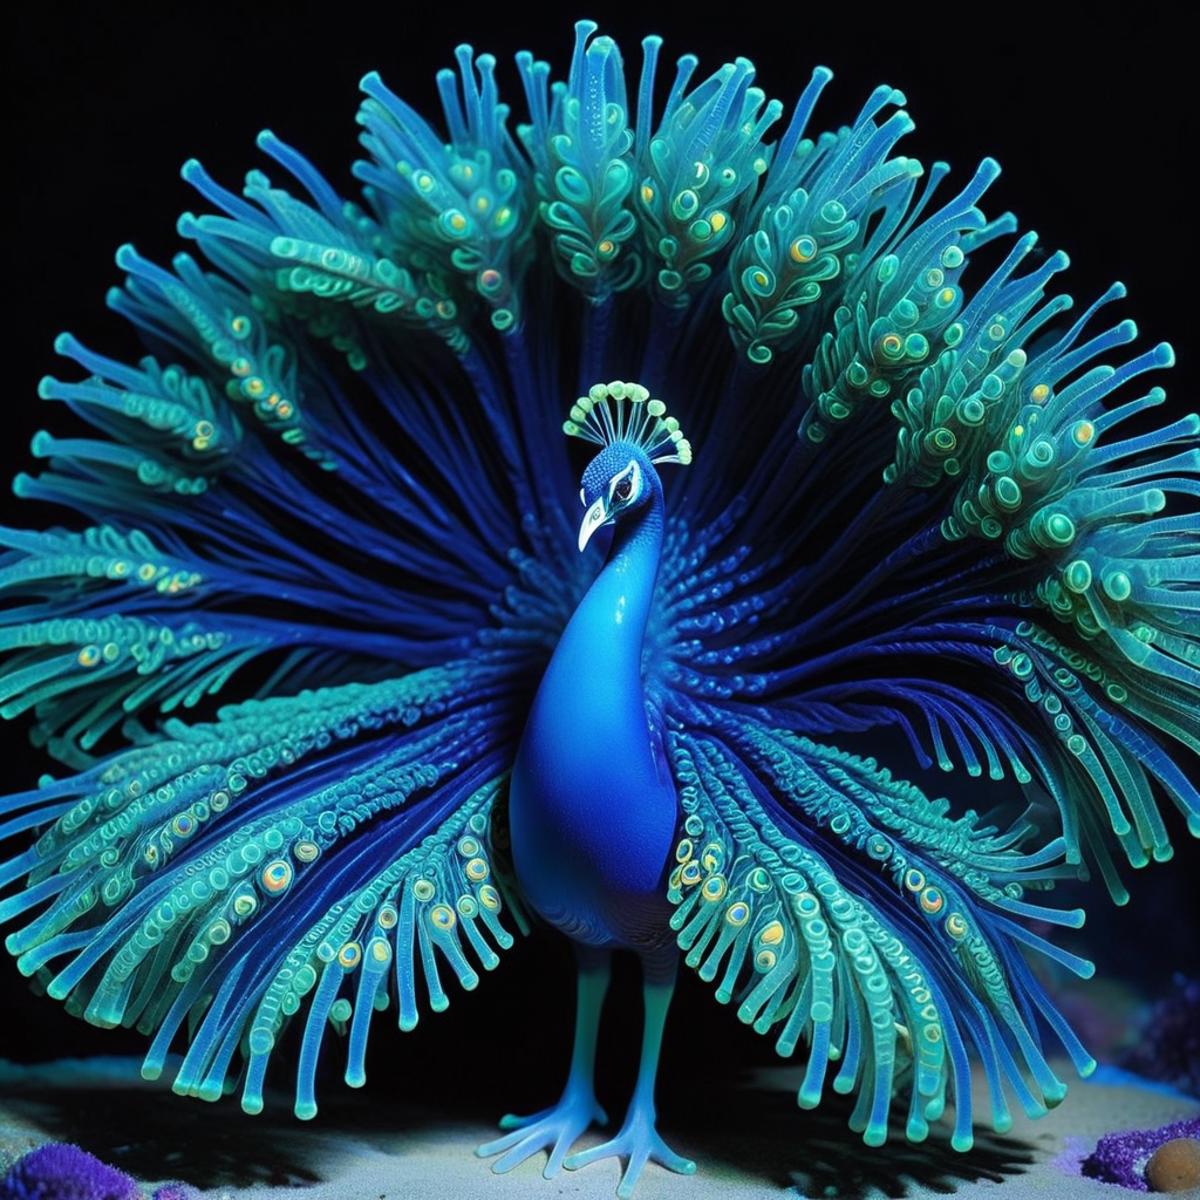 A blue peacock with blue and green feathers standing in front of a purple object.